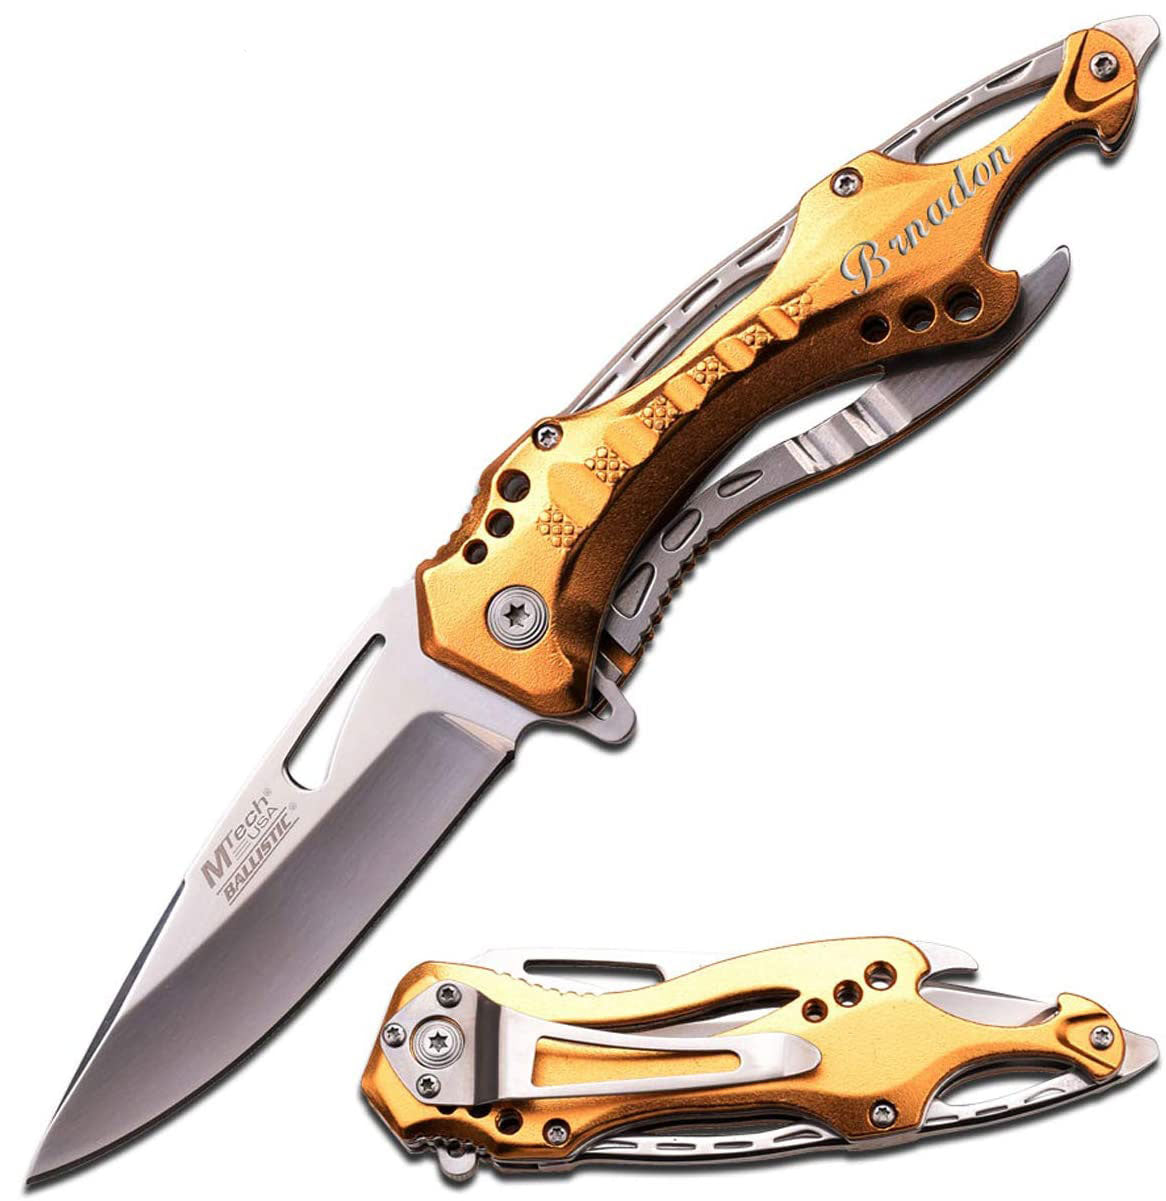 GIFTS INFINITY 4.5" Closed Personalized Engraved Folding Pocket Knife, Stainless Steel Tactical Blade Knife with Gold Silver Handle